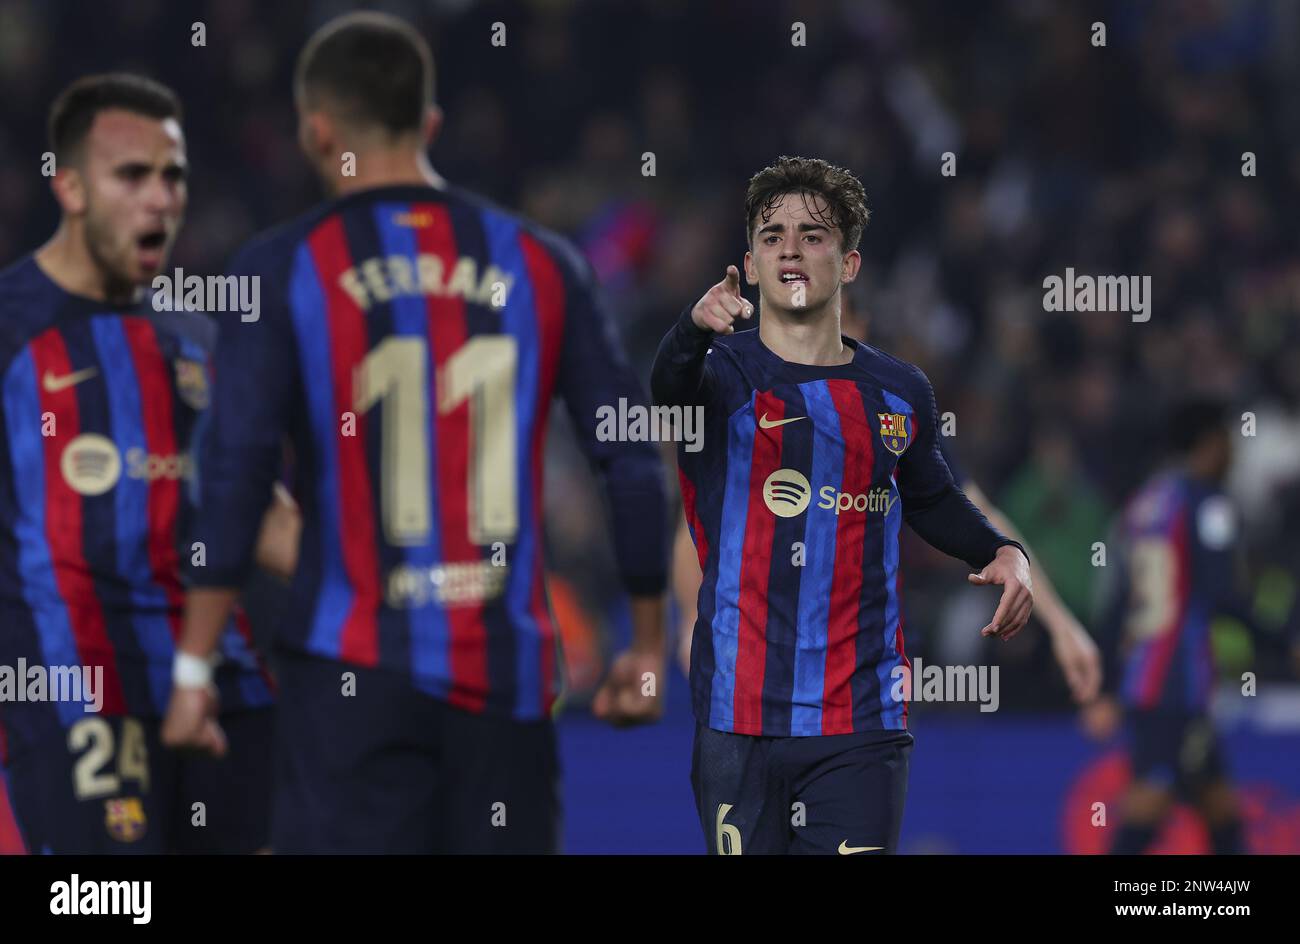 Barcelona, Spain. 19th Feb, 2023. Gavi of Barcelona during the La Liga football match between Barcelona and Cadiz in Estadio Camp Nou in Barcelona, Spain. Barcelona won the game 2-0 (goals by Sergi Roberto 43; Robert Lewandowski 45 1) (Foto: Sports Press Photo/Sports Press Photo/C - ONE HOUR DEADLINE - ONLY ACTIVATE FTP IF IMAGES LESS THAN ONE HOUR OLD - Alamy) Credit: SPP Sport Press Photo. /Alamy Live News Stock Photo